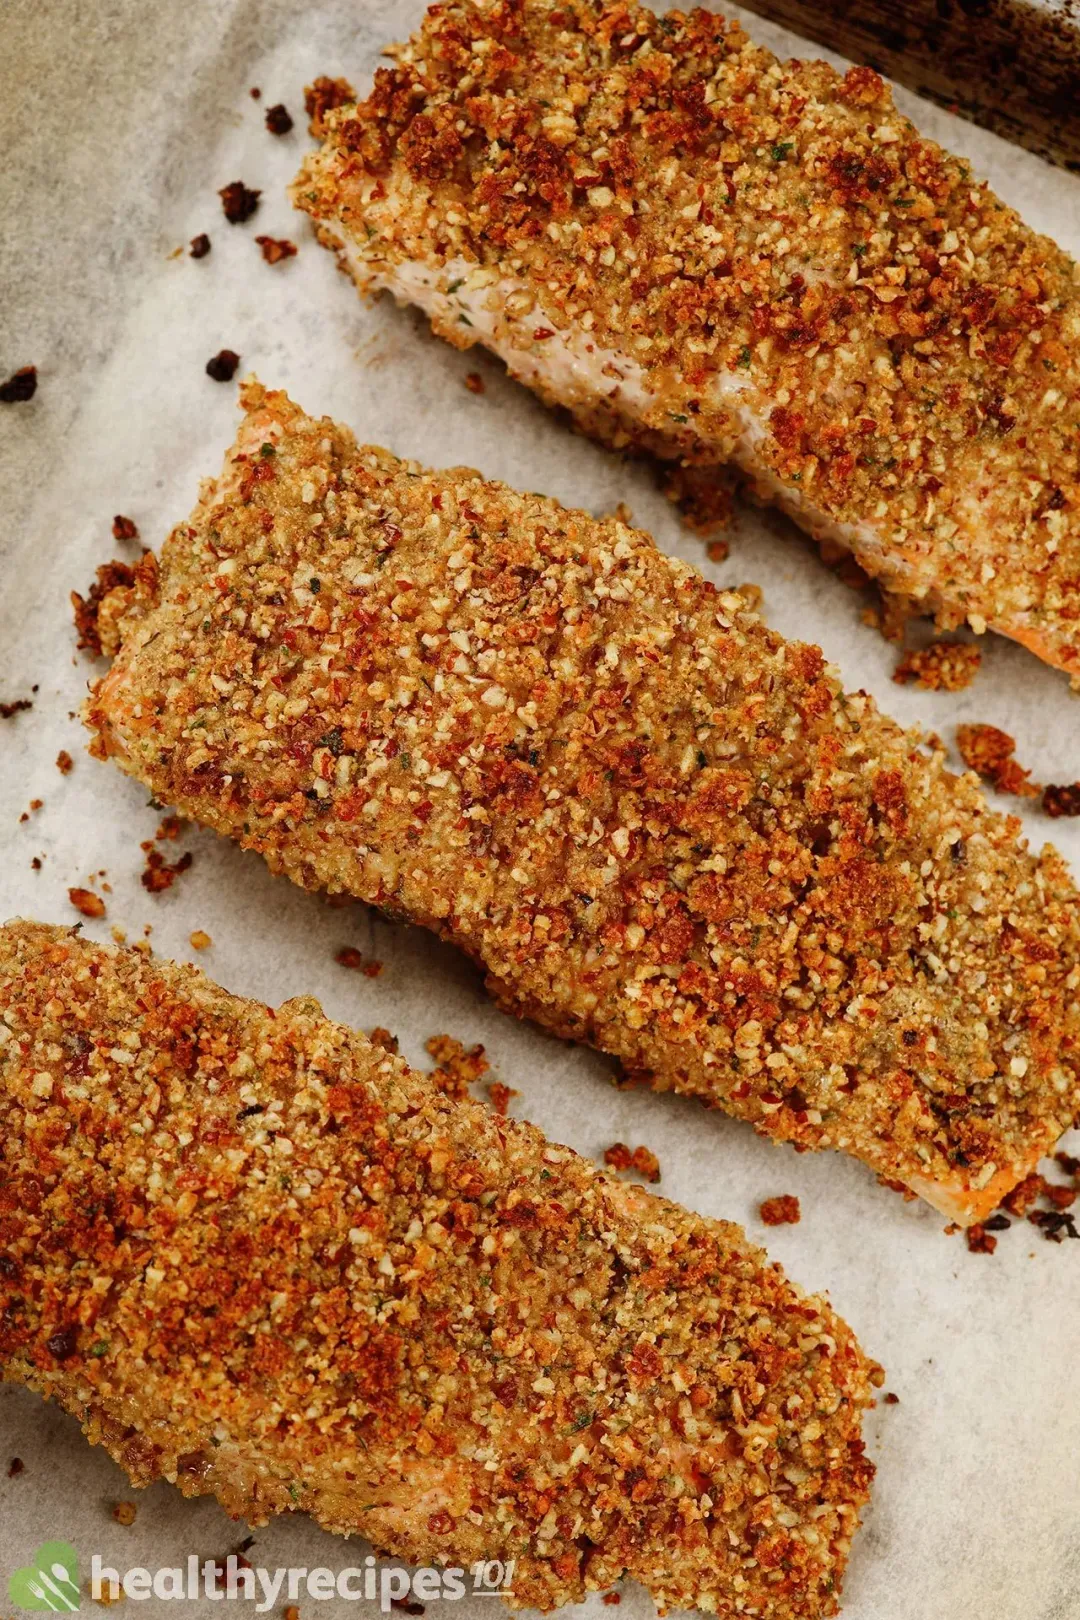 Three salmon filets that are fully dredged in pecan crust and placed on a parchment paper.